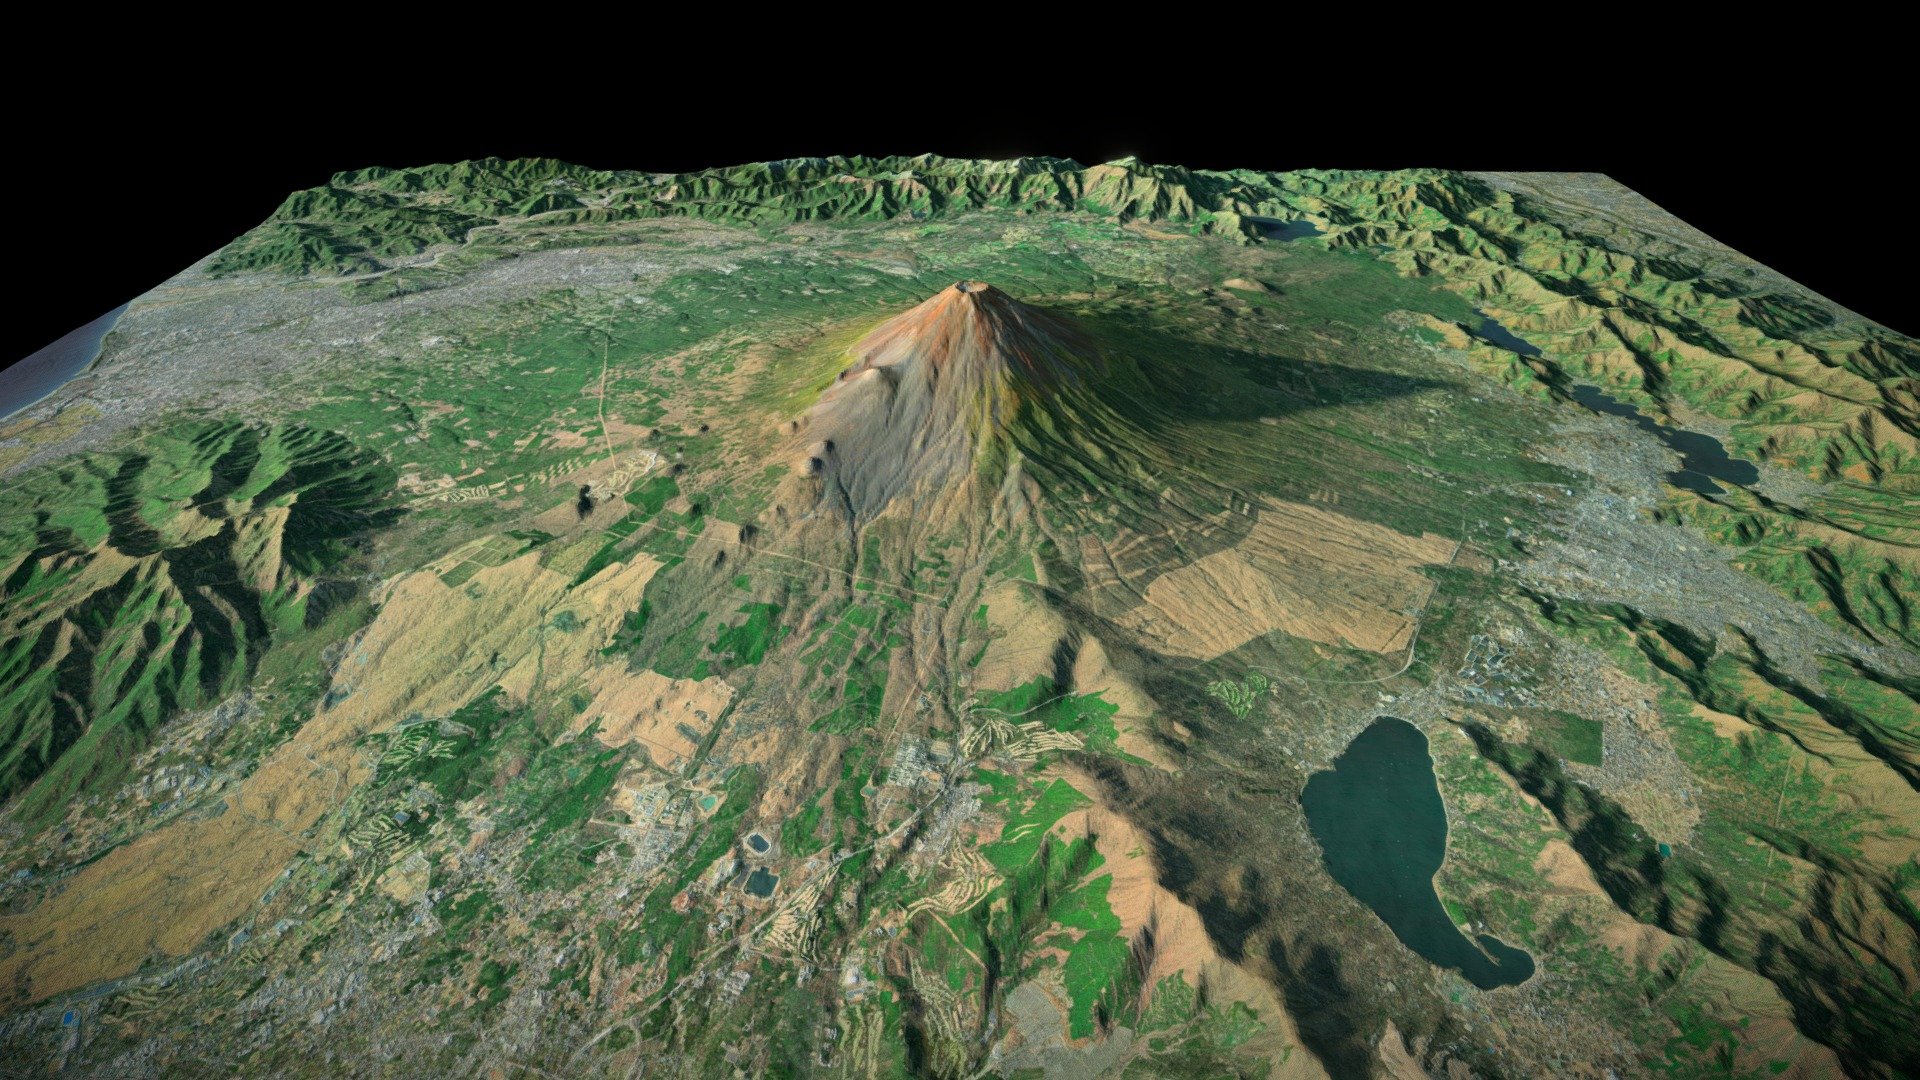 Mount Fuji - Japan
Located on the island of Honshu, 3,776 m (12,389.2 ft.).
Highly detailed 3D terrain based on real-world data.
3D package real-time and offline rendering ready.

3D Assets and Maps available in 8K, 4K, 2K, 1K with 32bit Heightmap (Winter and Summer version included) here:
https://guillaumerenier.myportfolio.com/3d-terrain-mount-fuji

*only low poly model is display on Sketchfab

*Winter version available here: https://skfb.ly/osDyV

I hope you will enjoy this terrain.
Follow me on Instagram for more and feel free to tag me with your artwork https://www.instagram.com/guillaumerenier_art/ - Mount Fuji - Japan (Summer Version) - 3D model by Guillaume Renier (@WillDegrees) 3d model